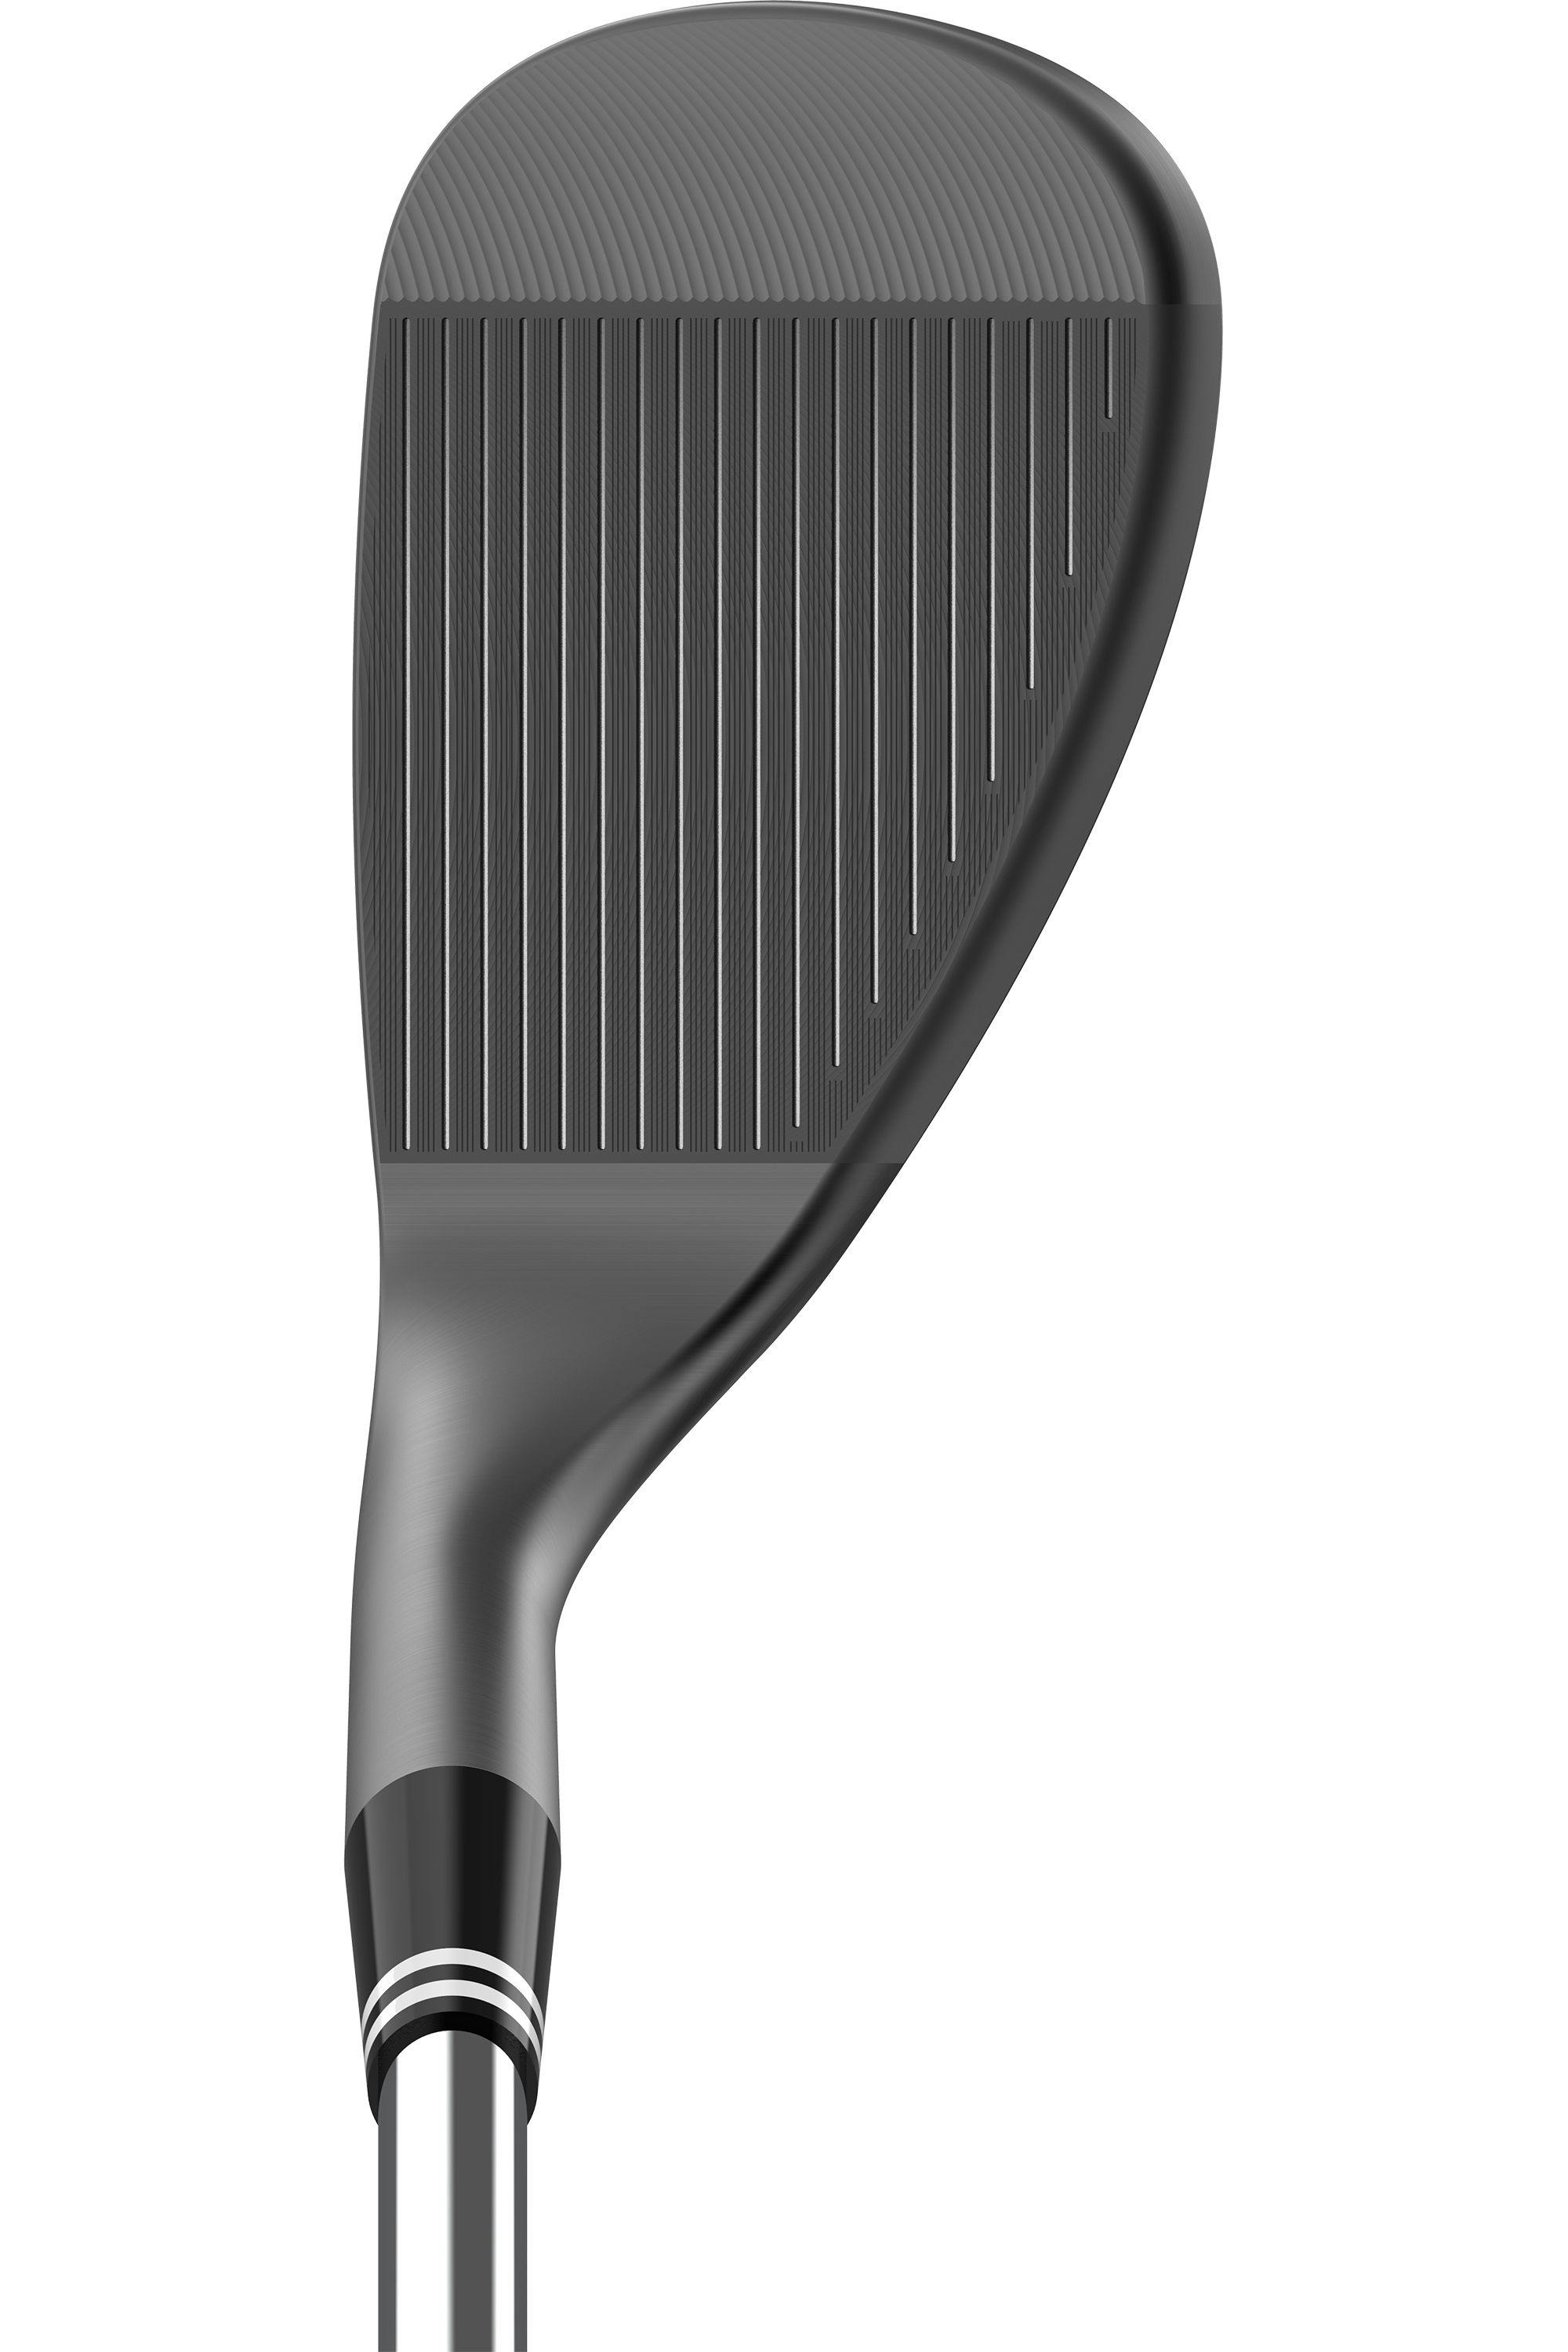 Cleveland RTX Zipcore Black Satin Wedge · Right handed · Steel · 56° · 10°